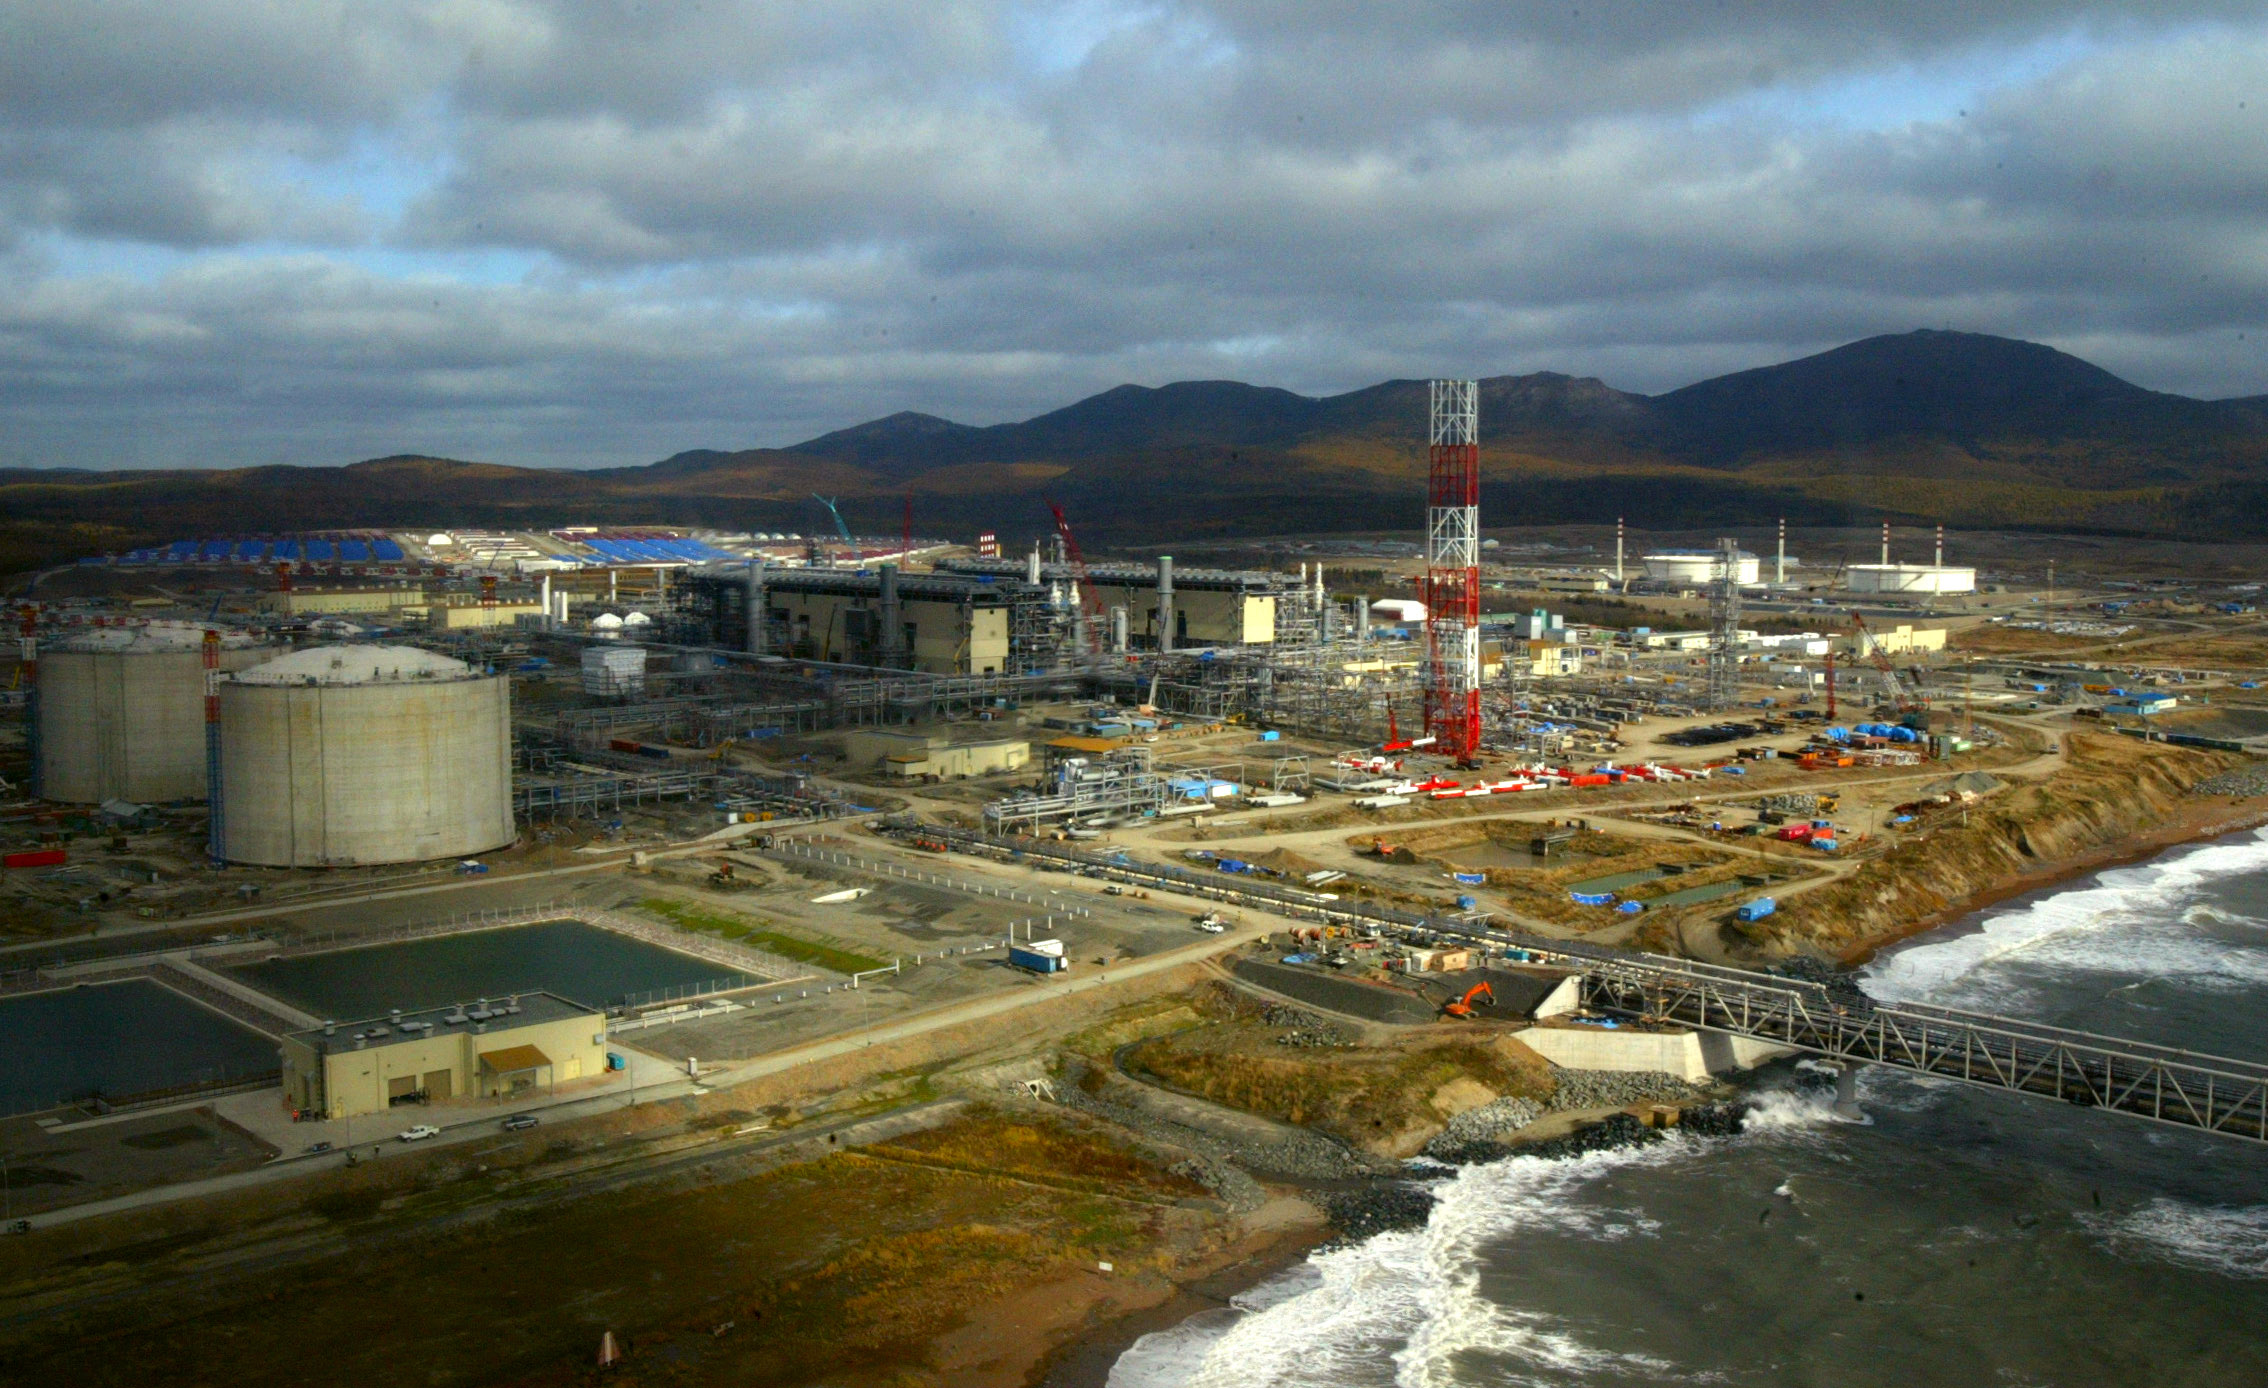 An aerial view of the liquefaction plant, part of the Sakhalin-2 liquefied natural gas project in Sakhalin, Russia.